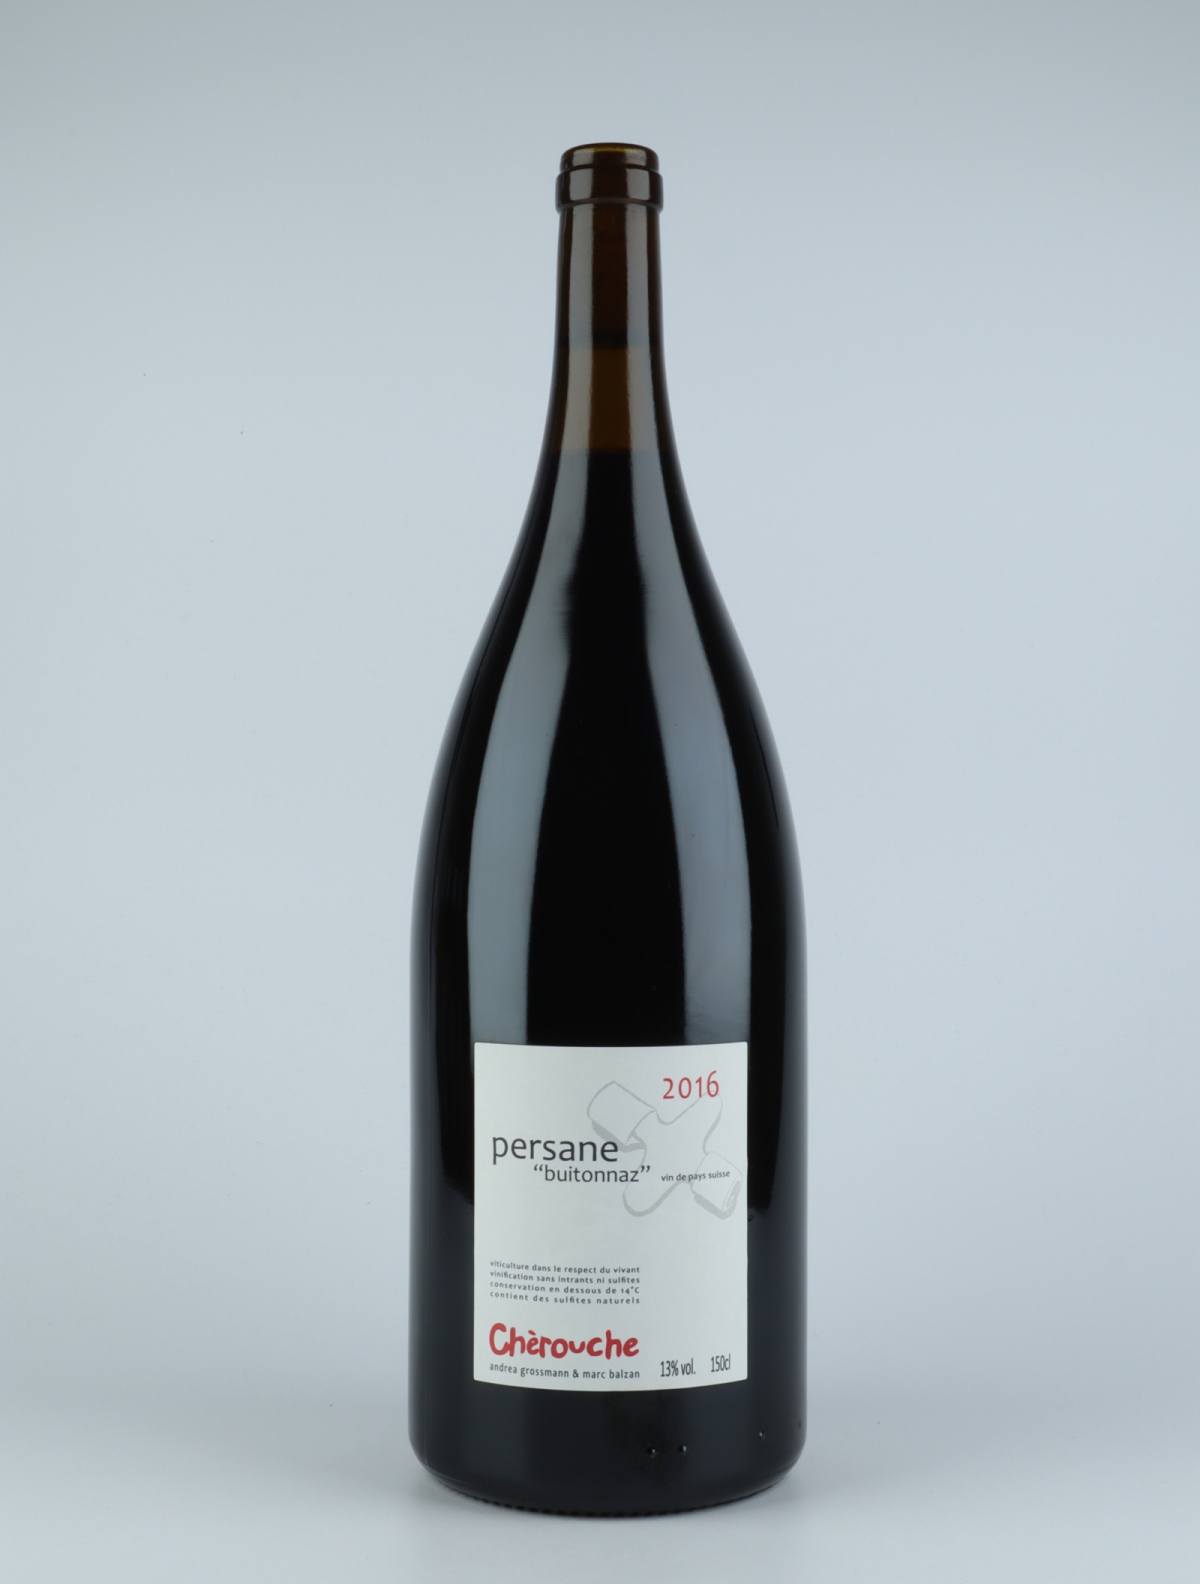 A bottle 2016 Persane Syrah Red wine from Chèrouche, Valais in Switzerland